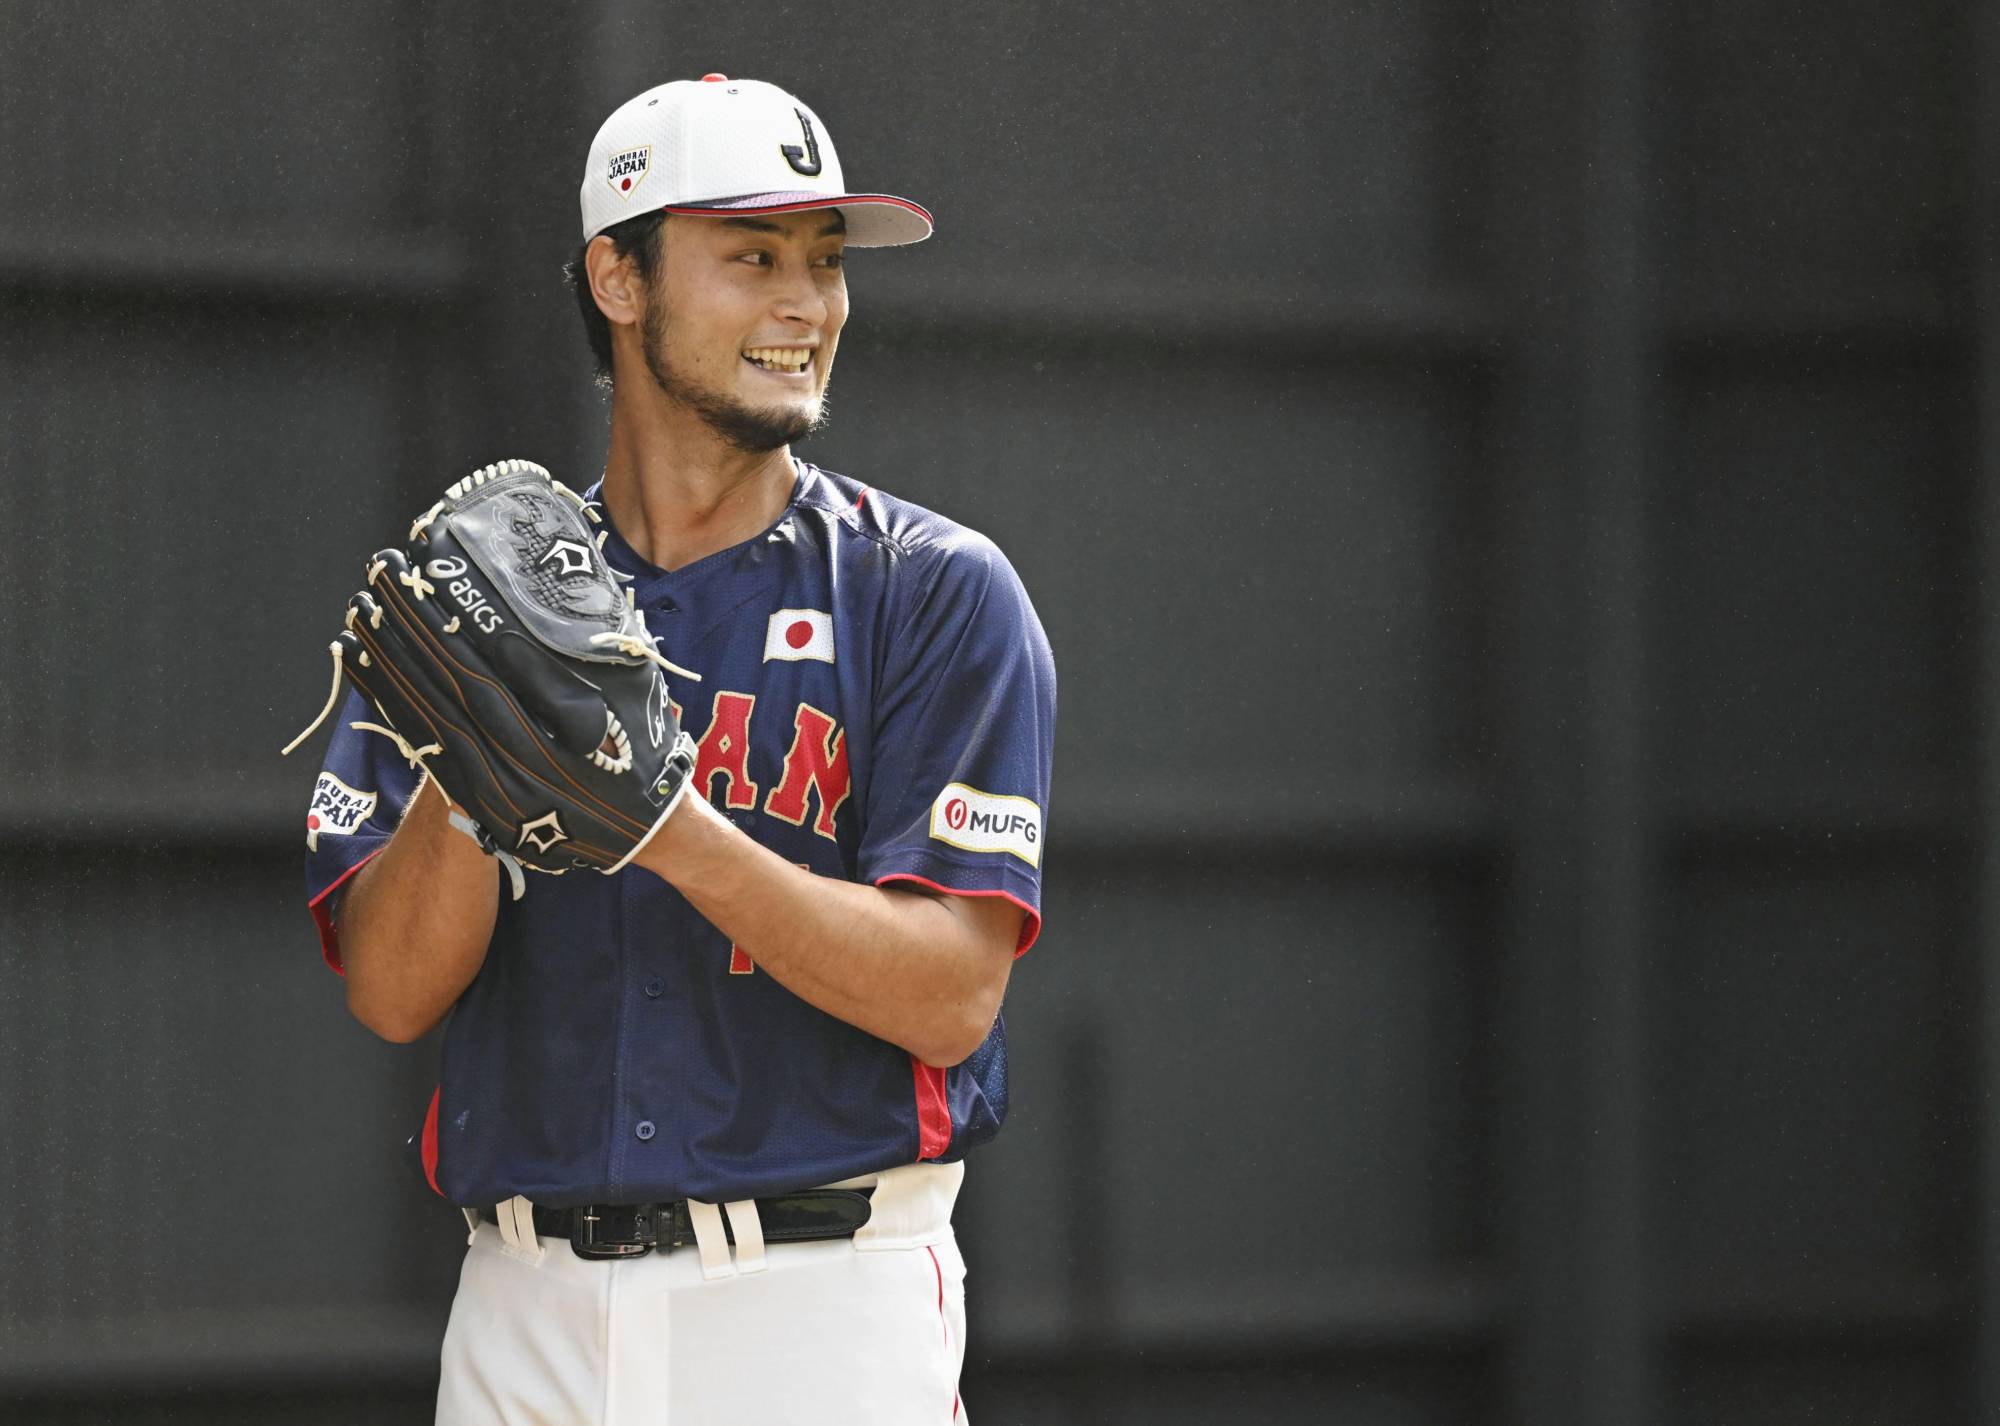 New Stage for Japan's Rising Pitching Star, Yu Darvish - The New York Times